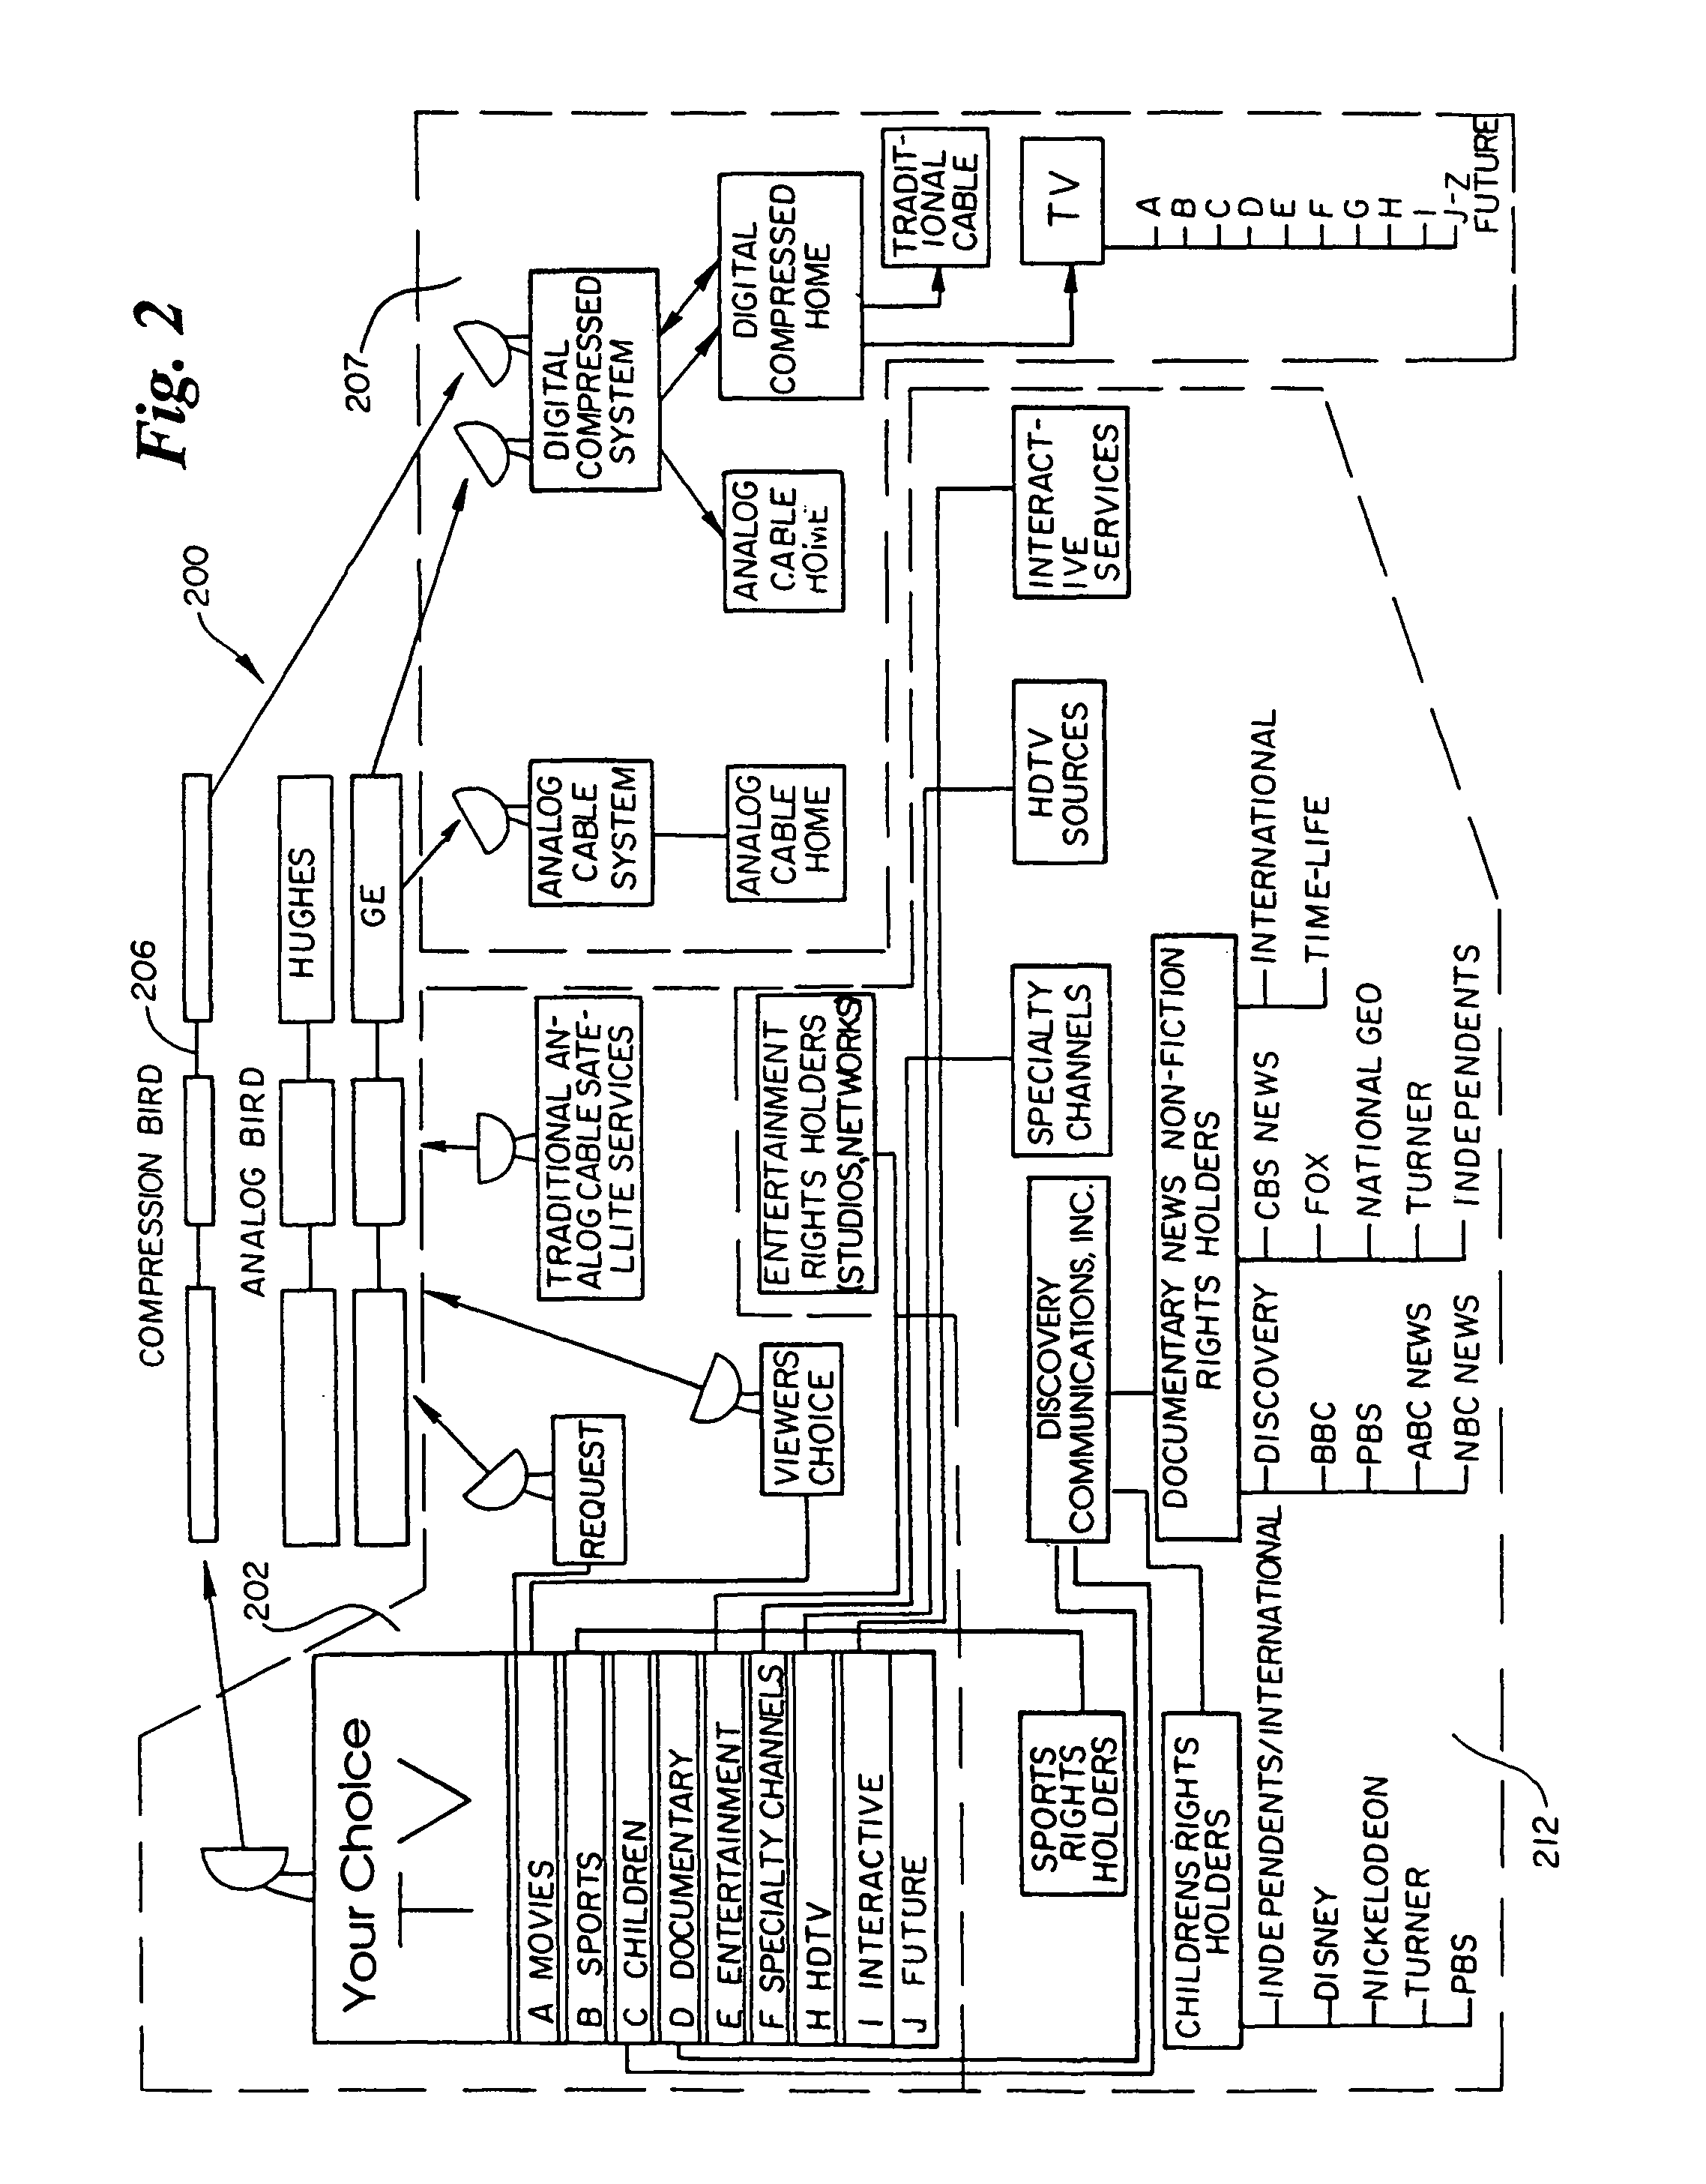 Method and apparatus for providing broadcast data services